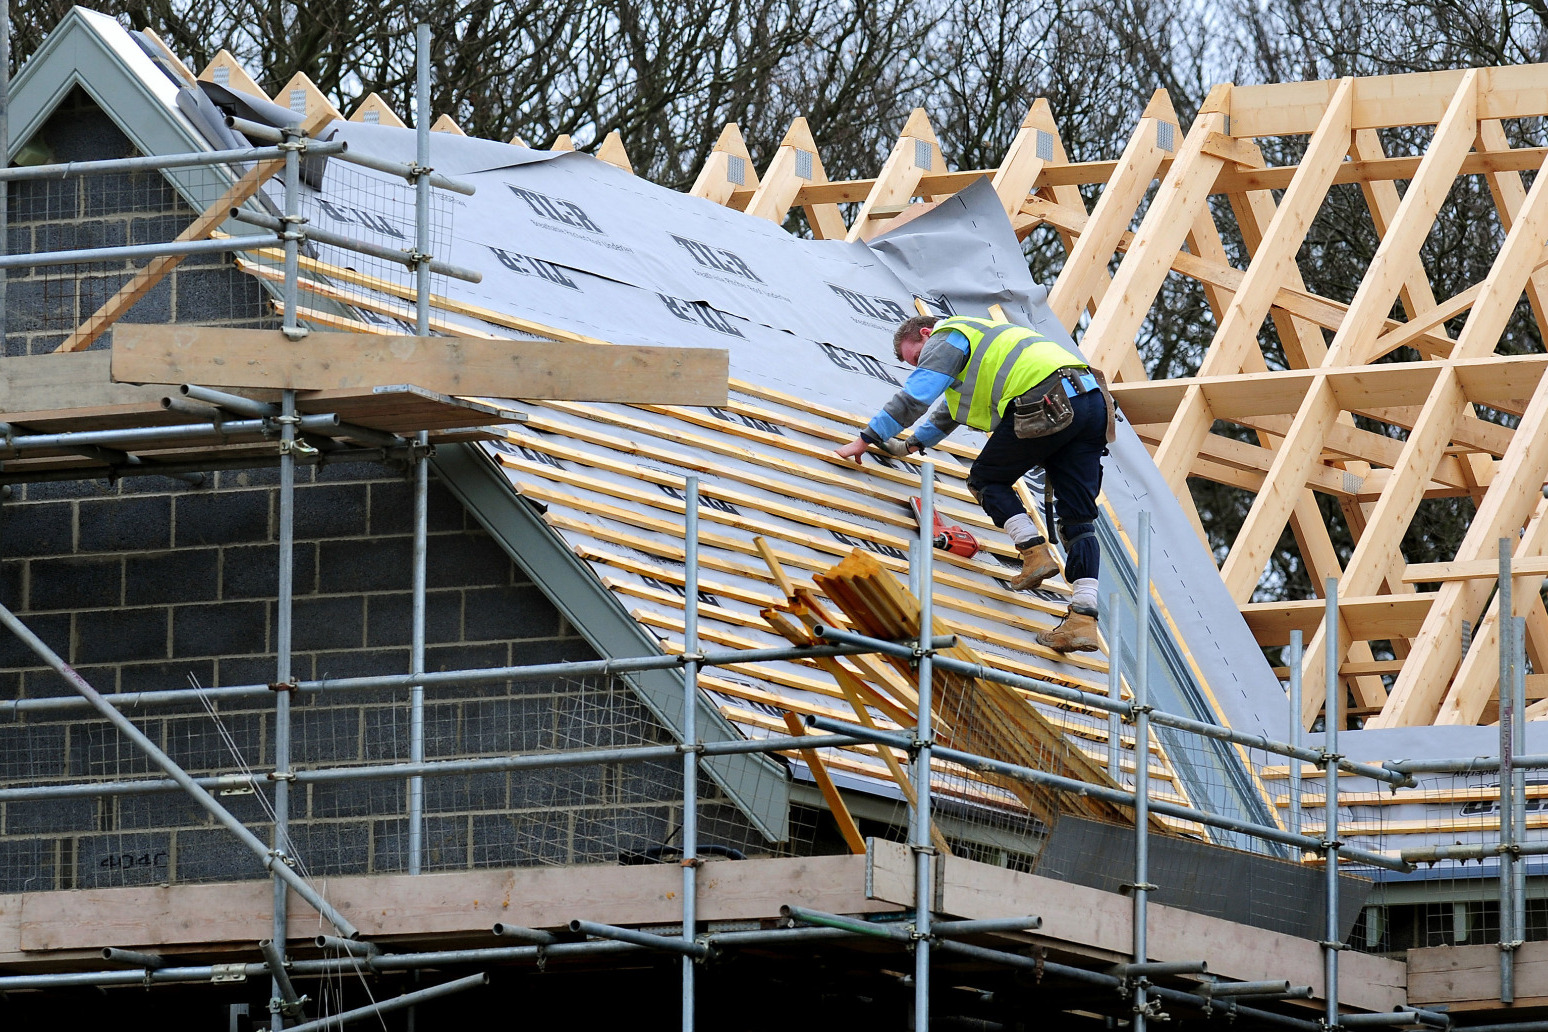 Make new homes built in Scotland so energy efficient that they do not require heating 